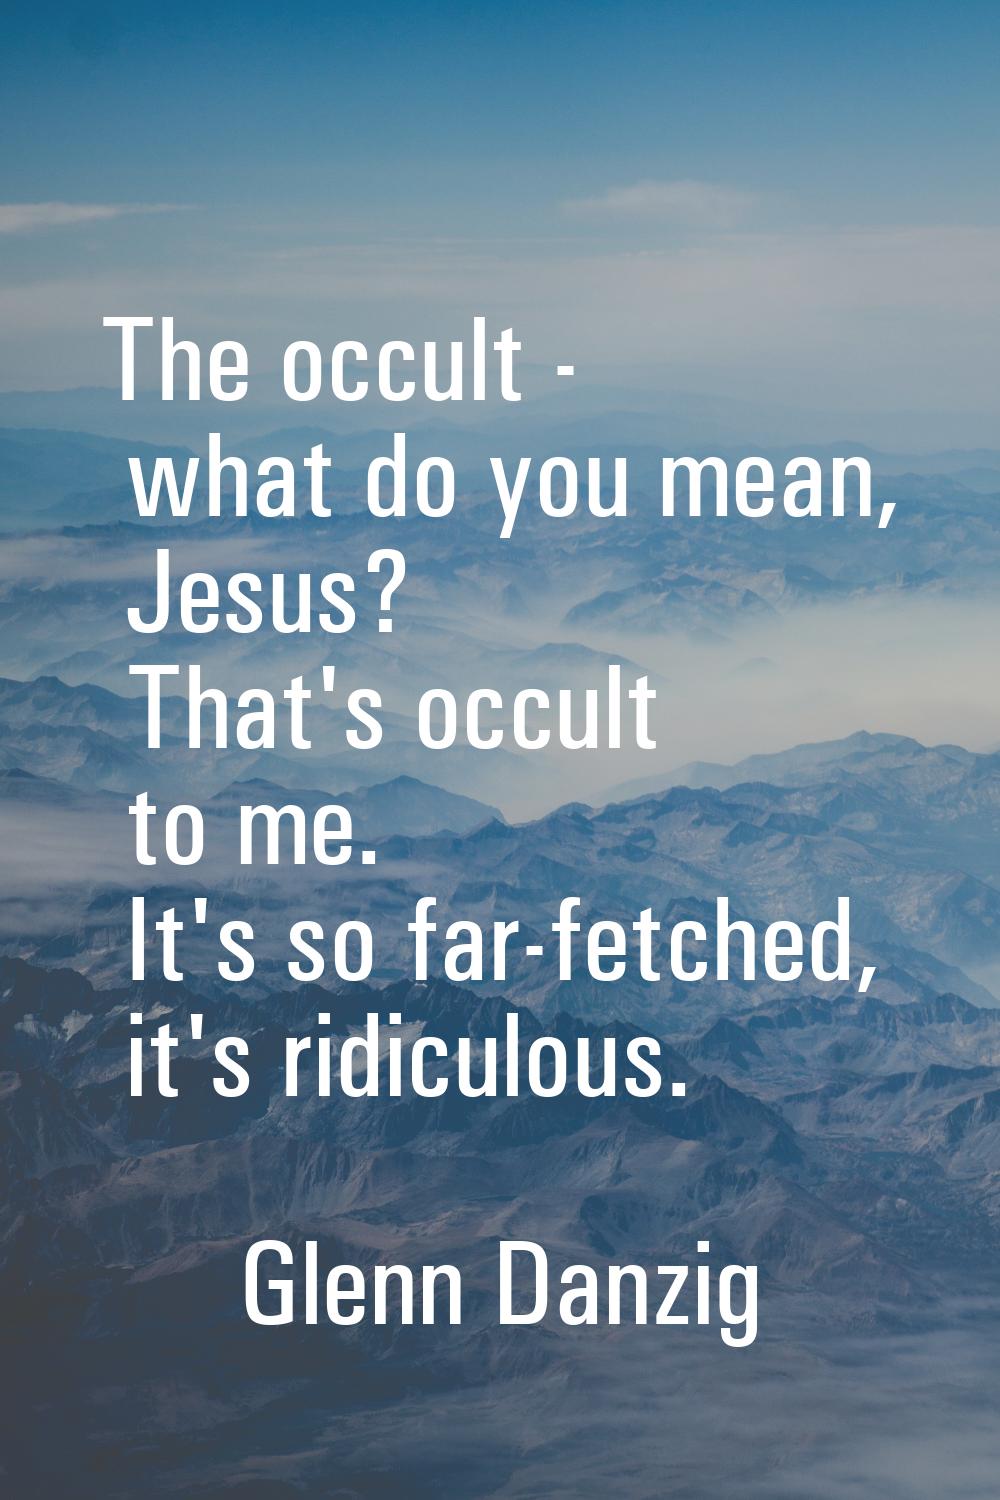 The occult - what do you mean, Jesus? That's occult to me. It's so far-fetched, it's ridiculous.